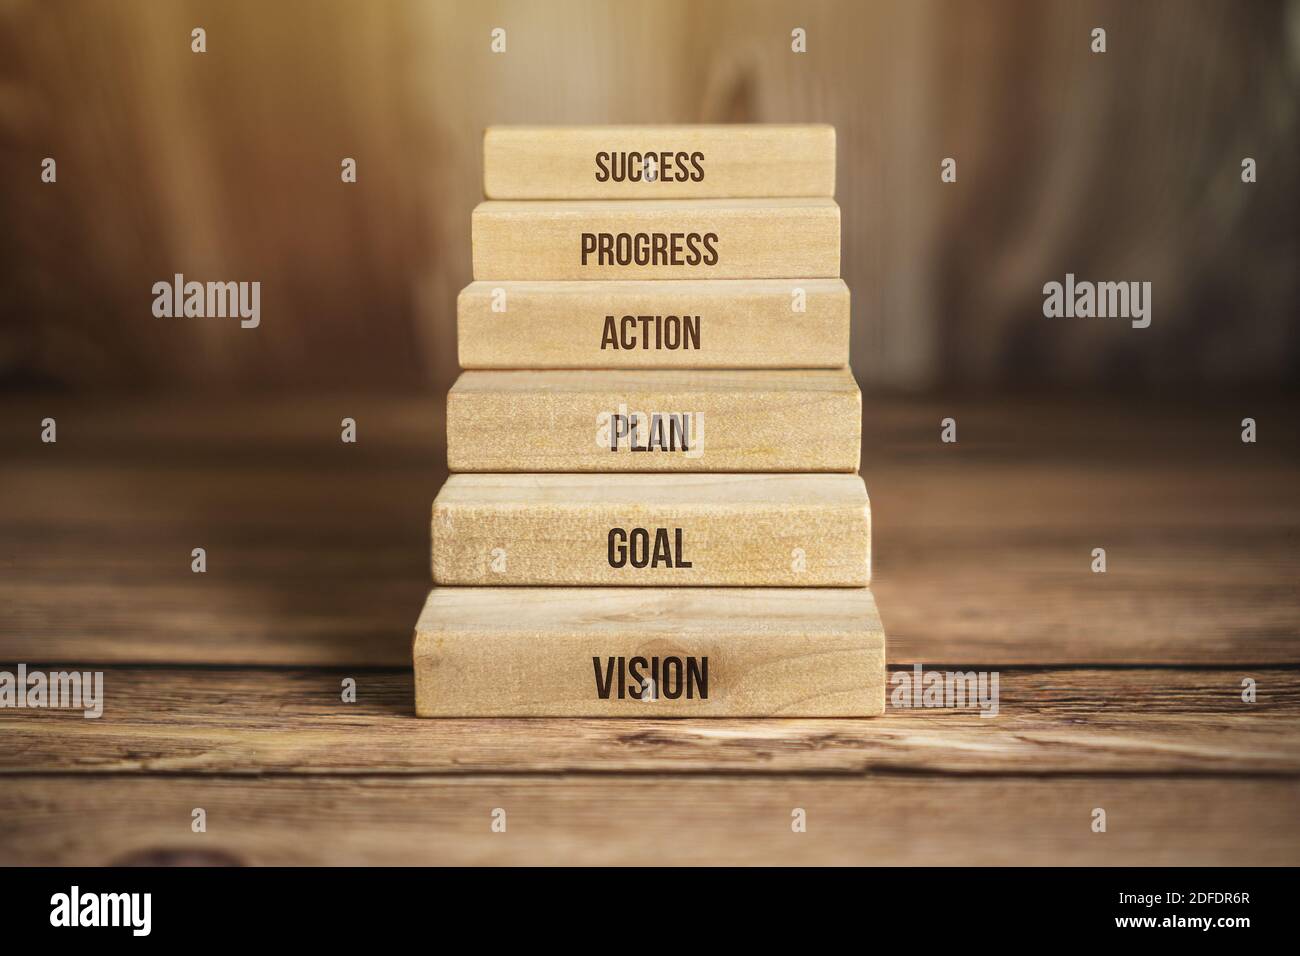 Wooden Block Ladder of Success. Business and Career Progress Concept. Stock Photo